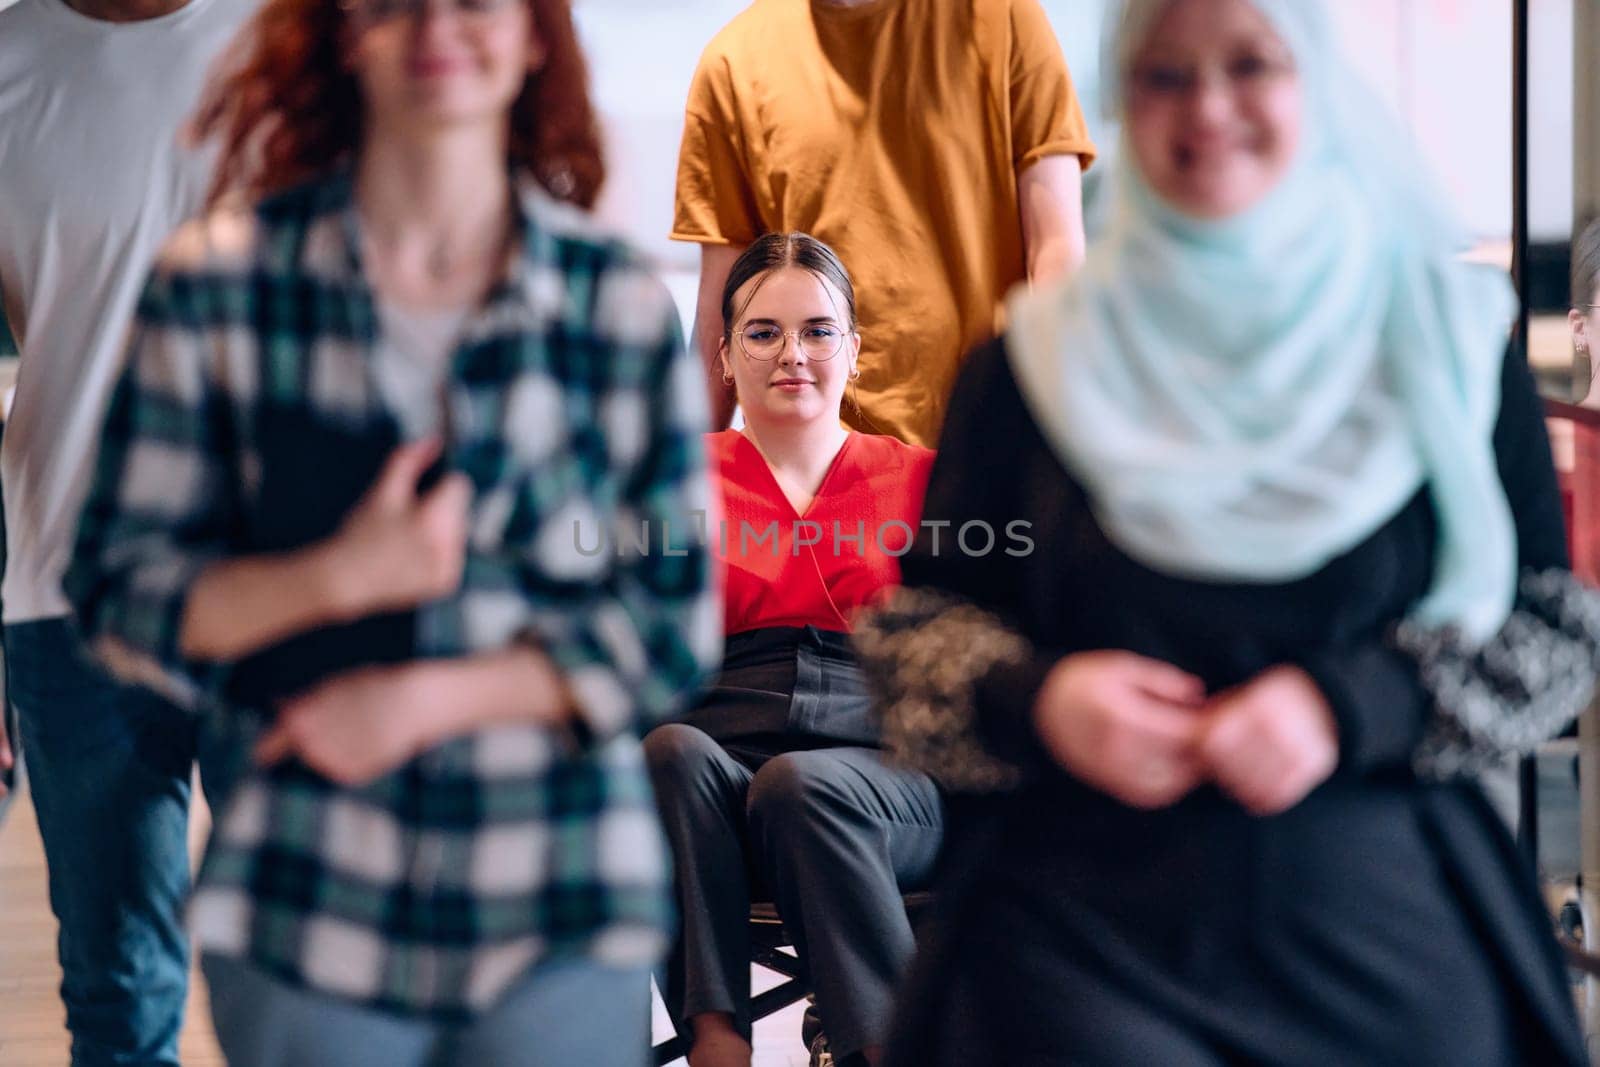 people walking a corridor in the glass-enclosed office of a modern startup, including a person in a wheelchair and a woman wearing a hijab.